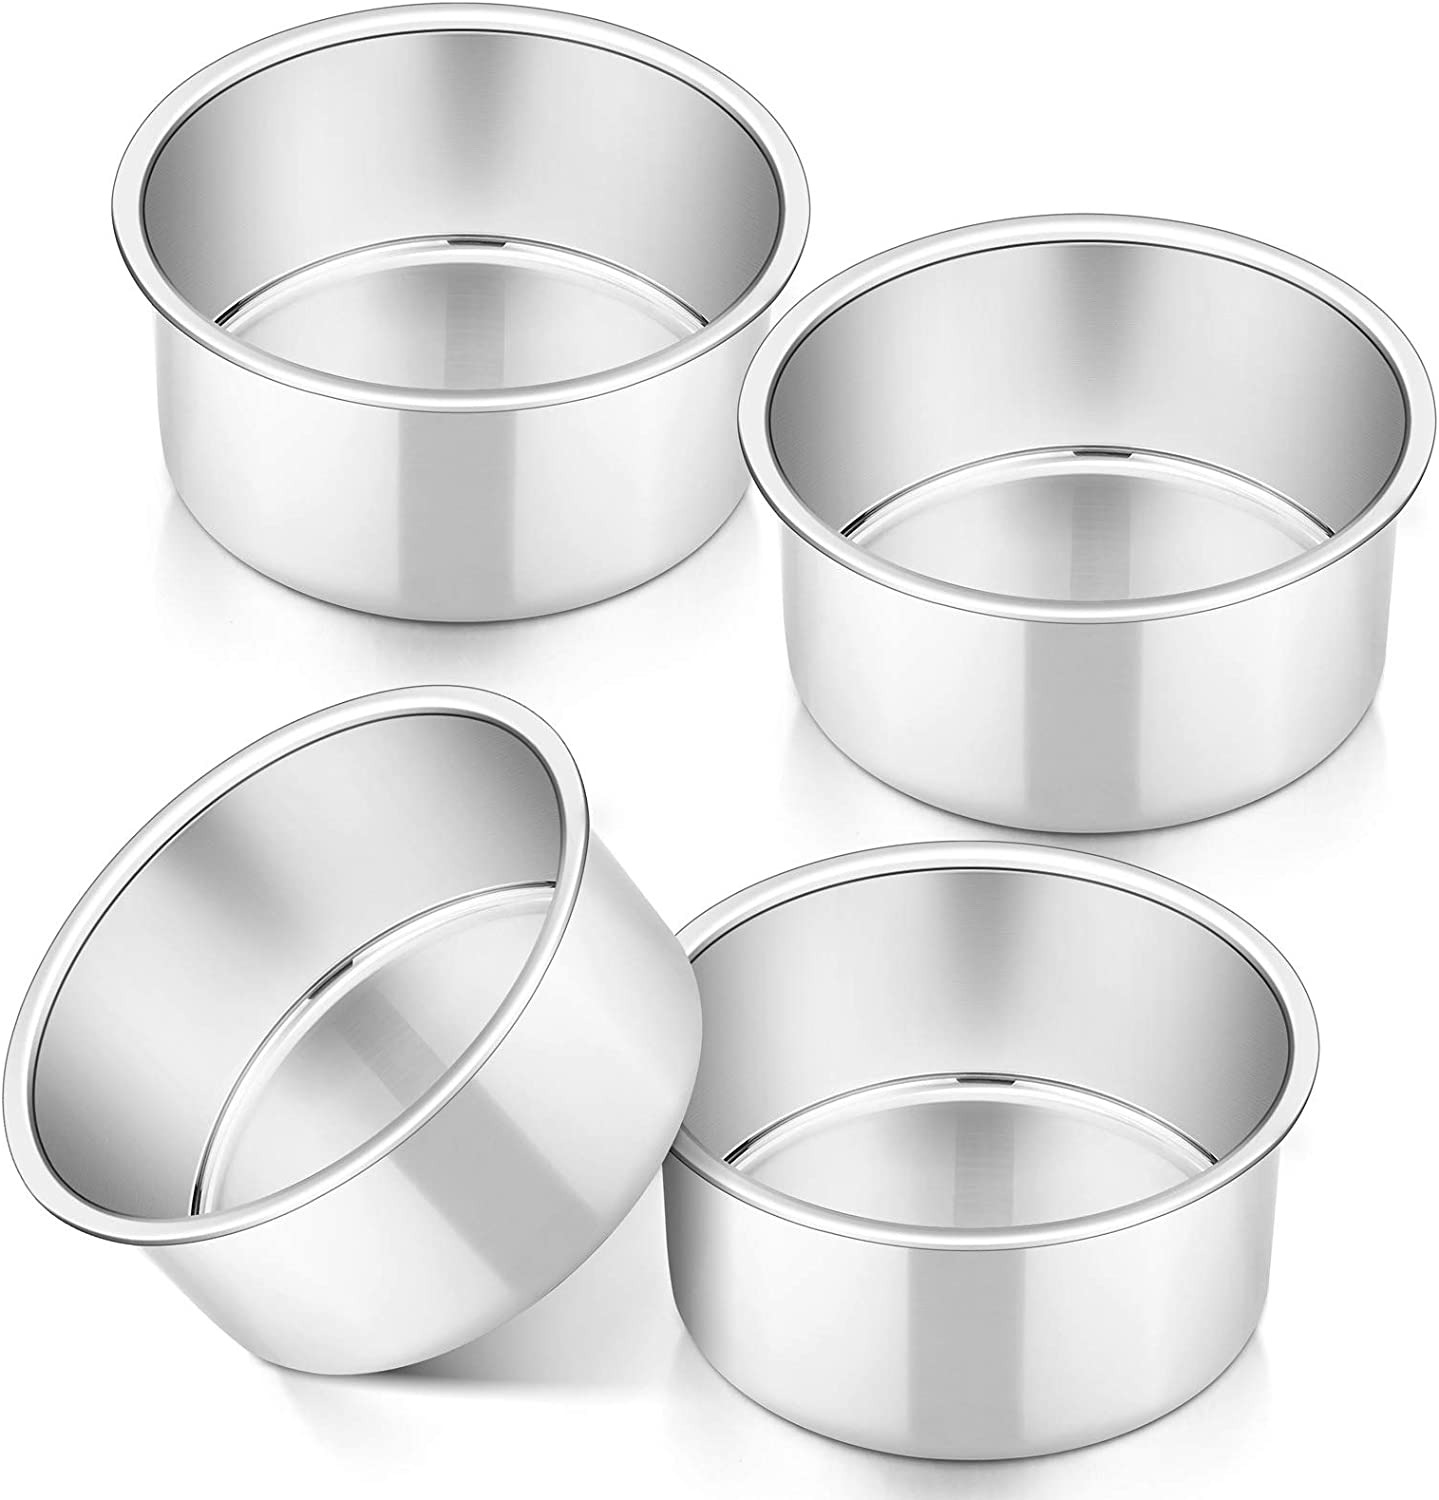 4 Inch Small Cake Pan Set of 4, Stainless Steel Baking round Tins Bakeware for M